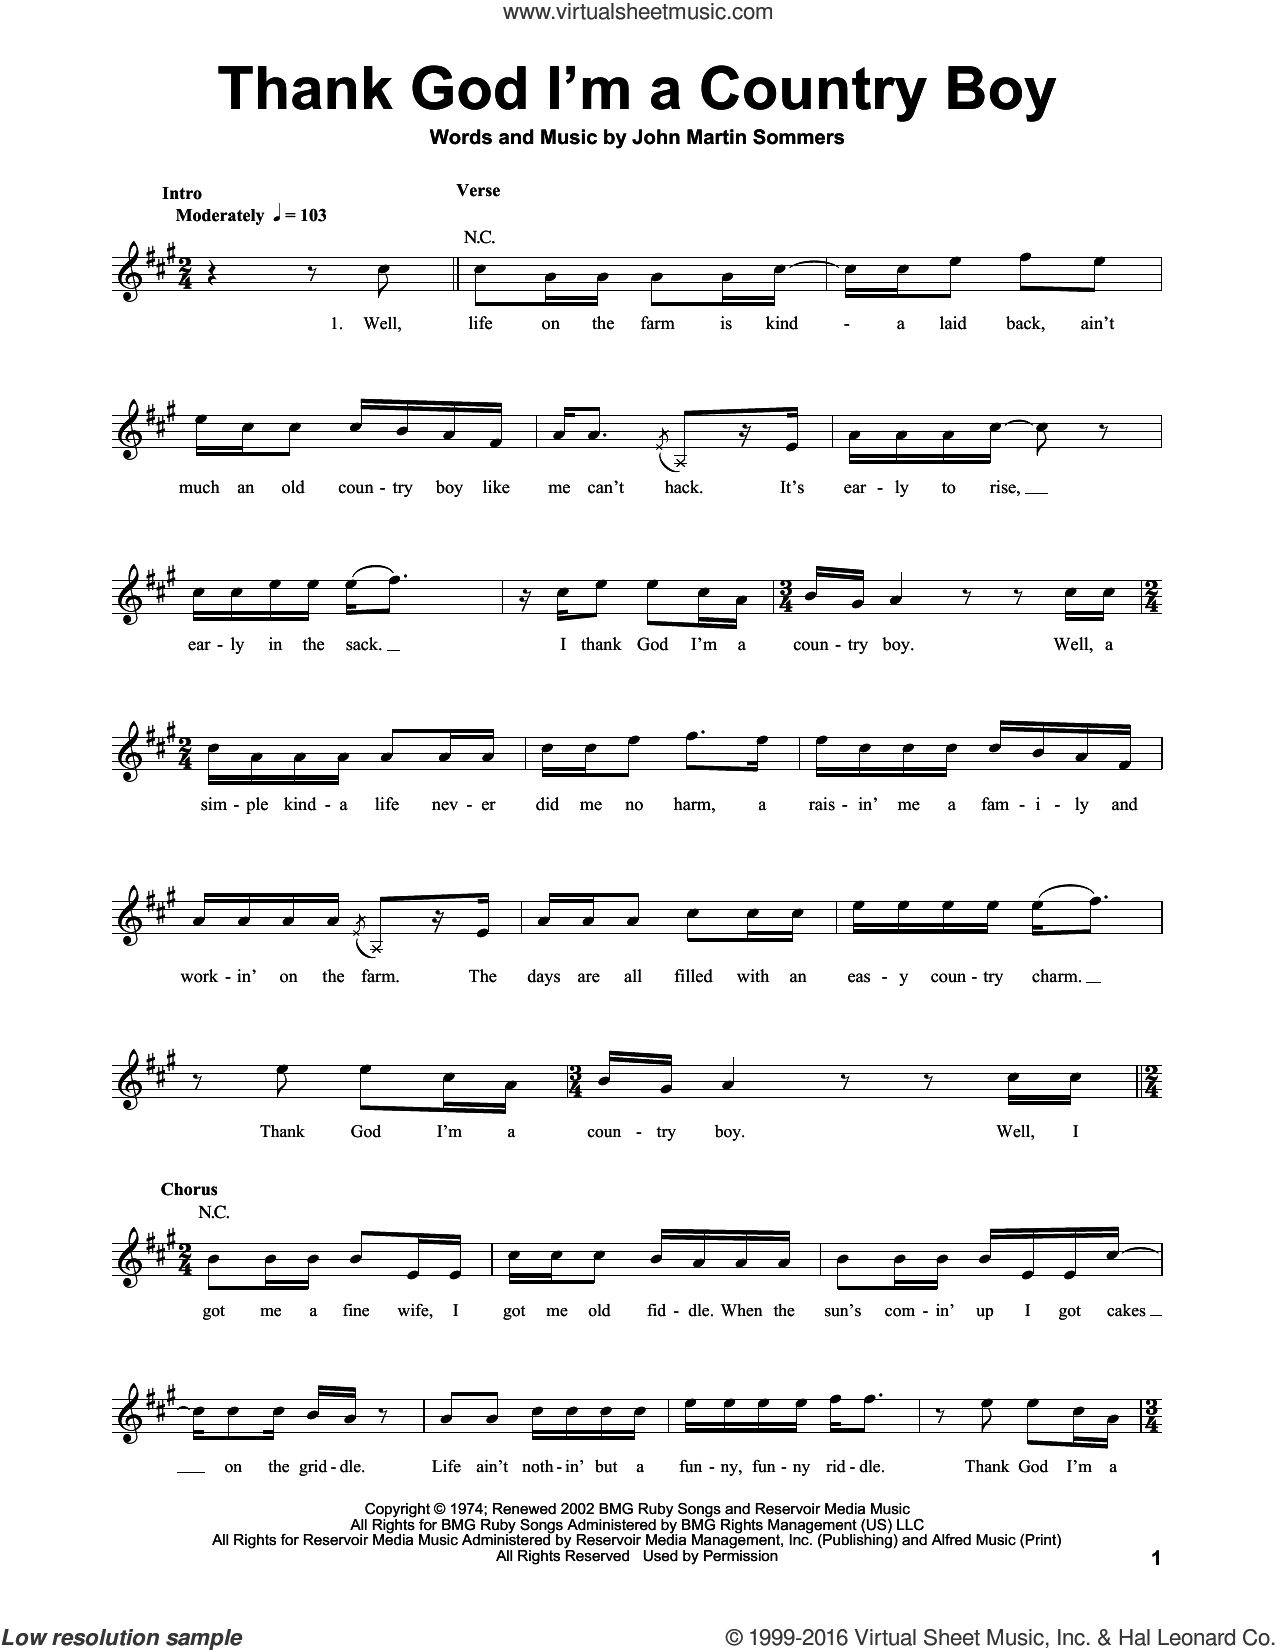 Thank God I'm A Country Boy sheet music for guitar (tablature, play-along)